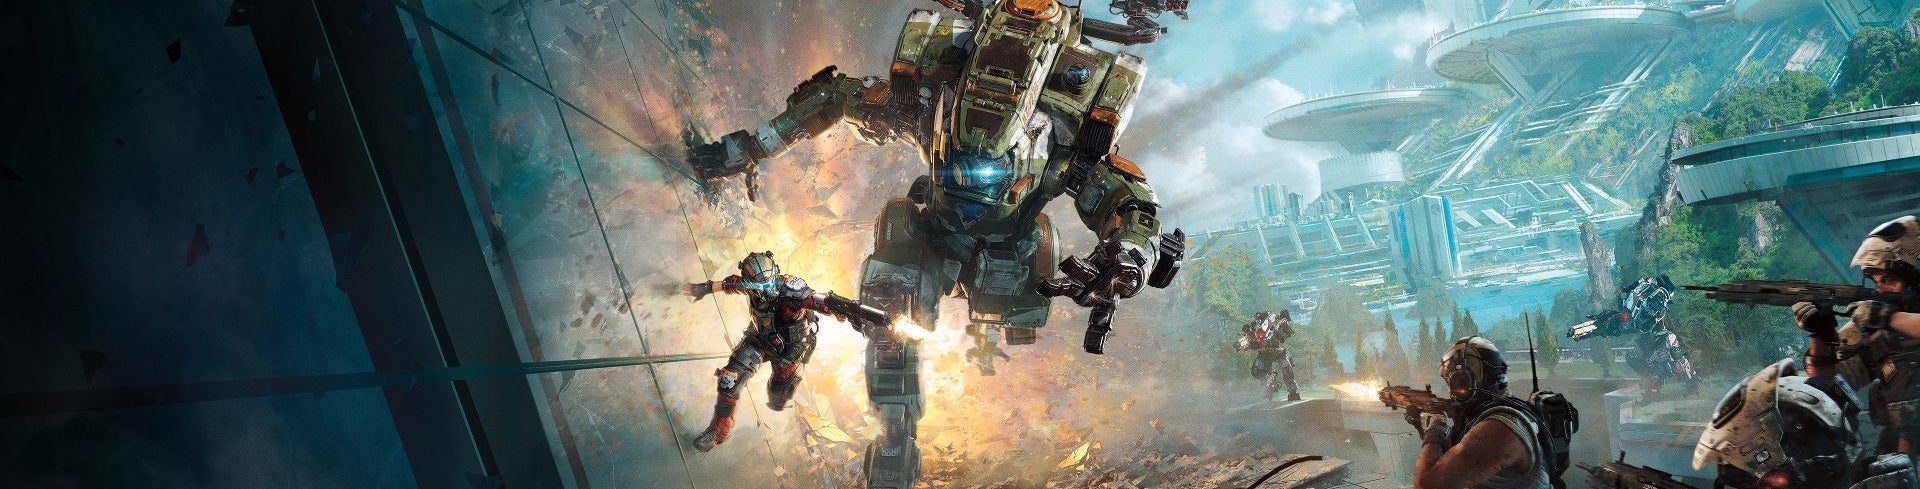 Image for Something's not right with Titanfall 2 on Xbox One X